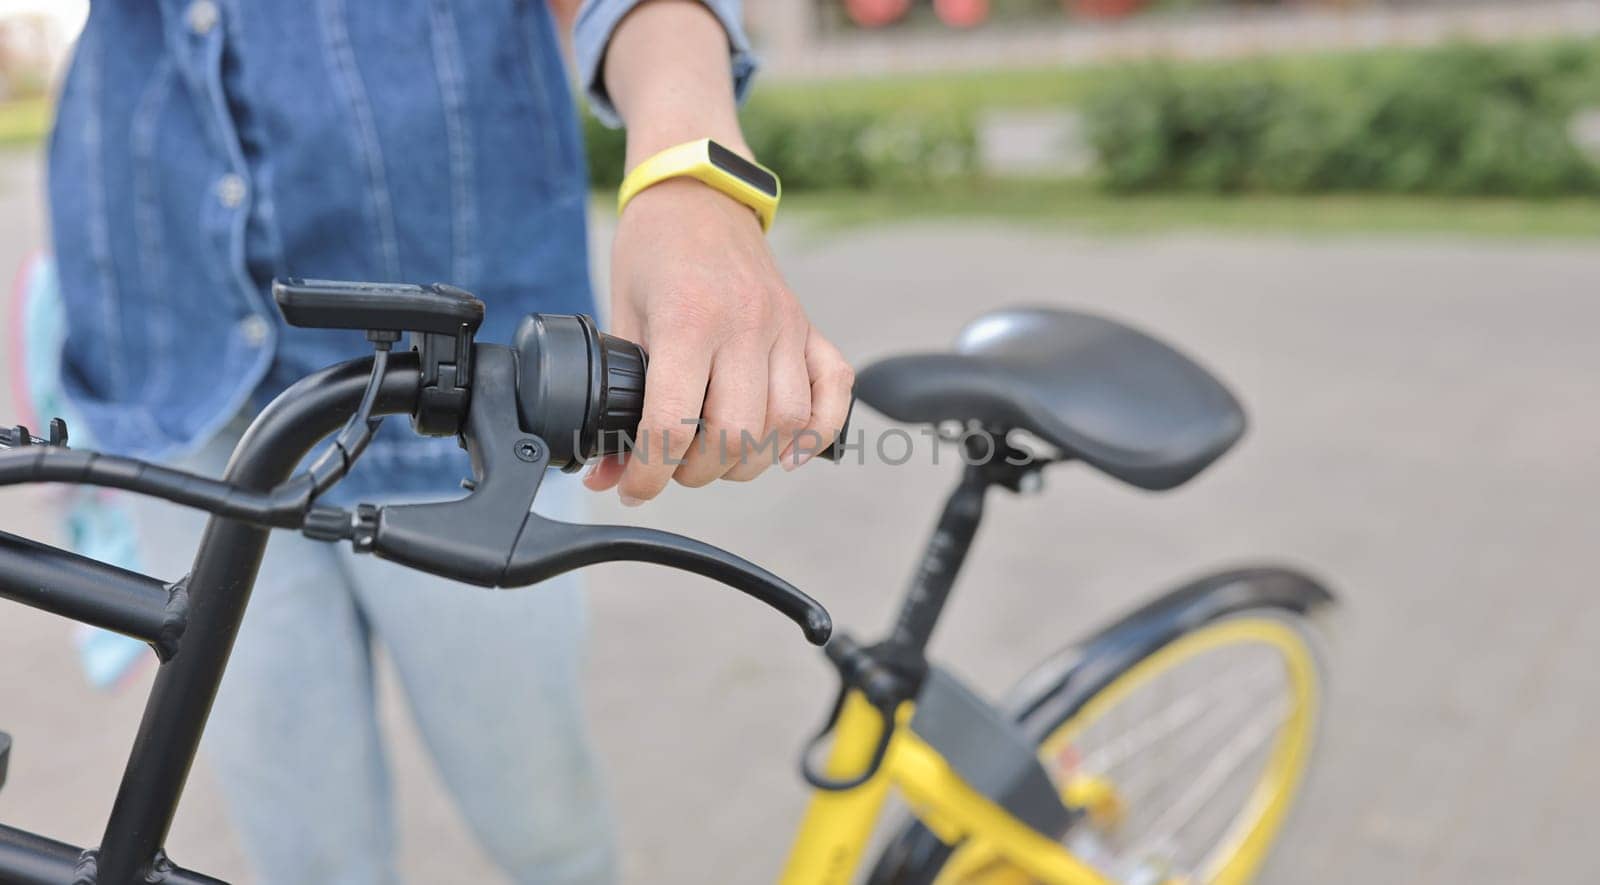 Woman hold handlebars of bicycle close up. by kuprevich